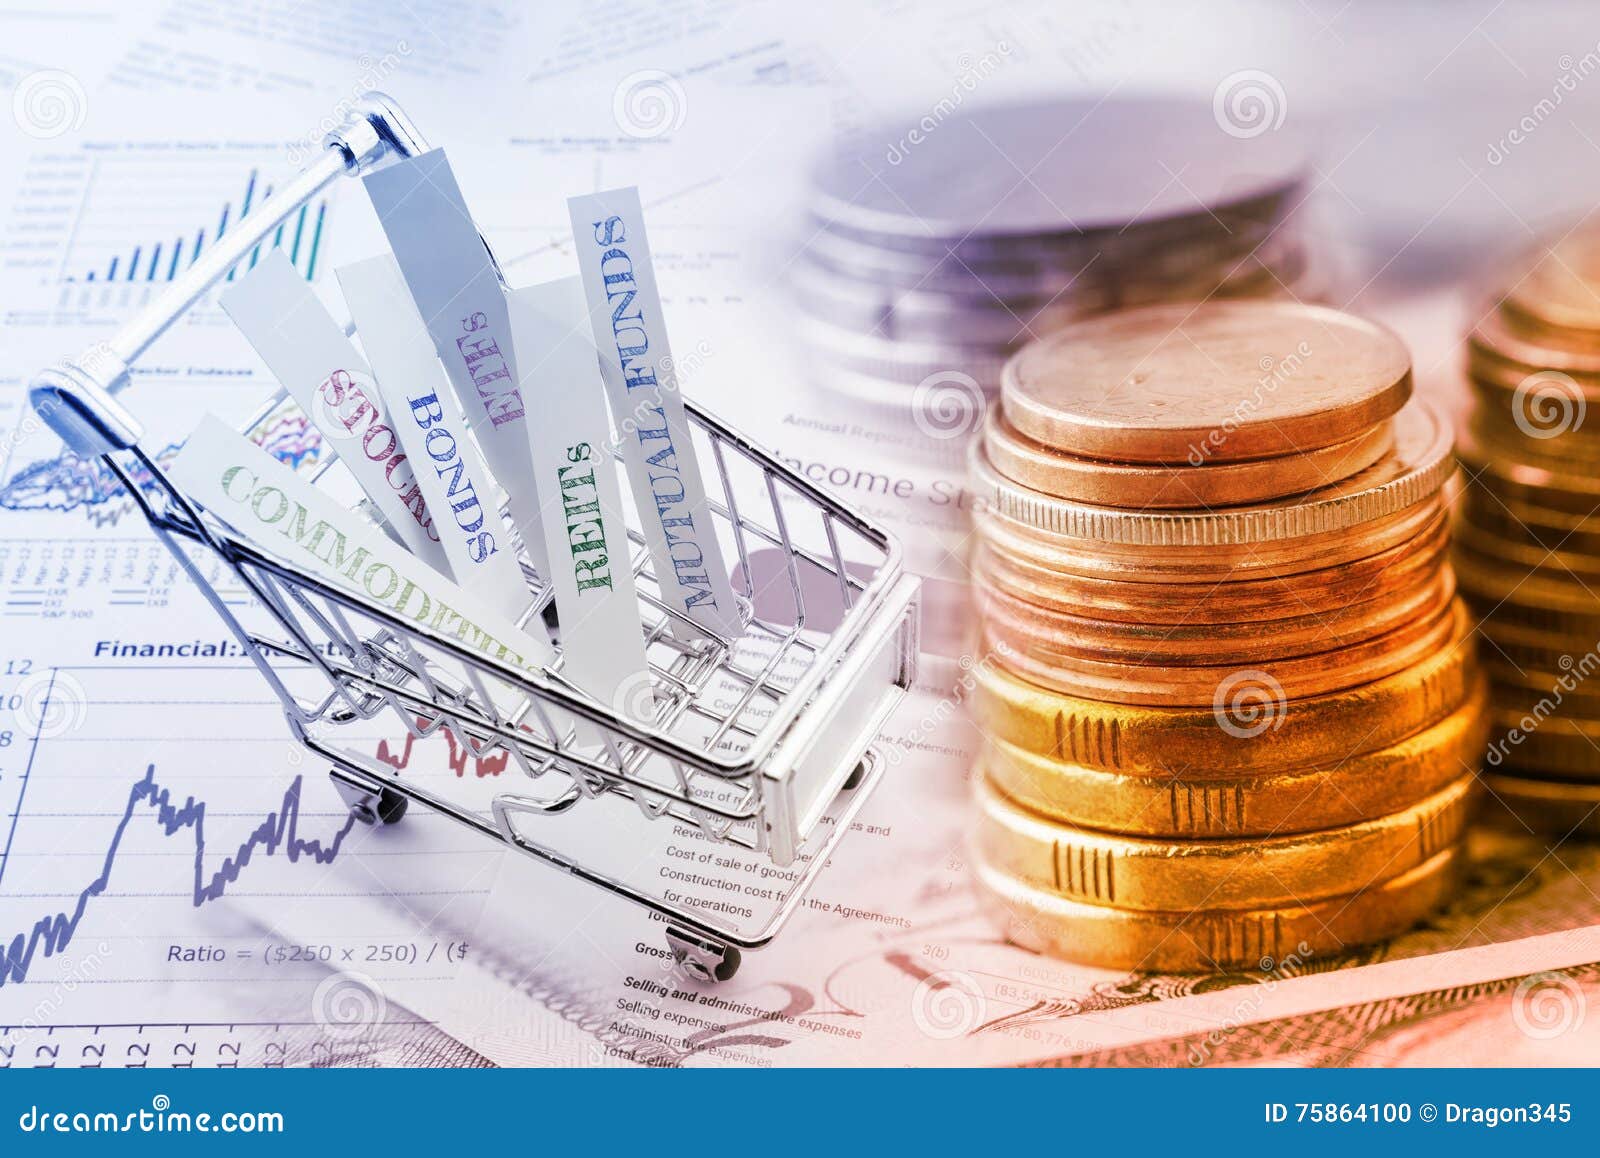 stack of coins and a trolley with various types of financial investment products.